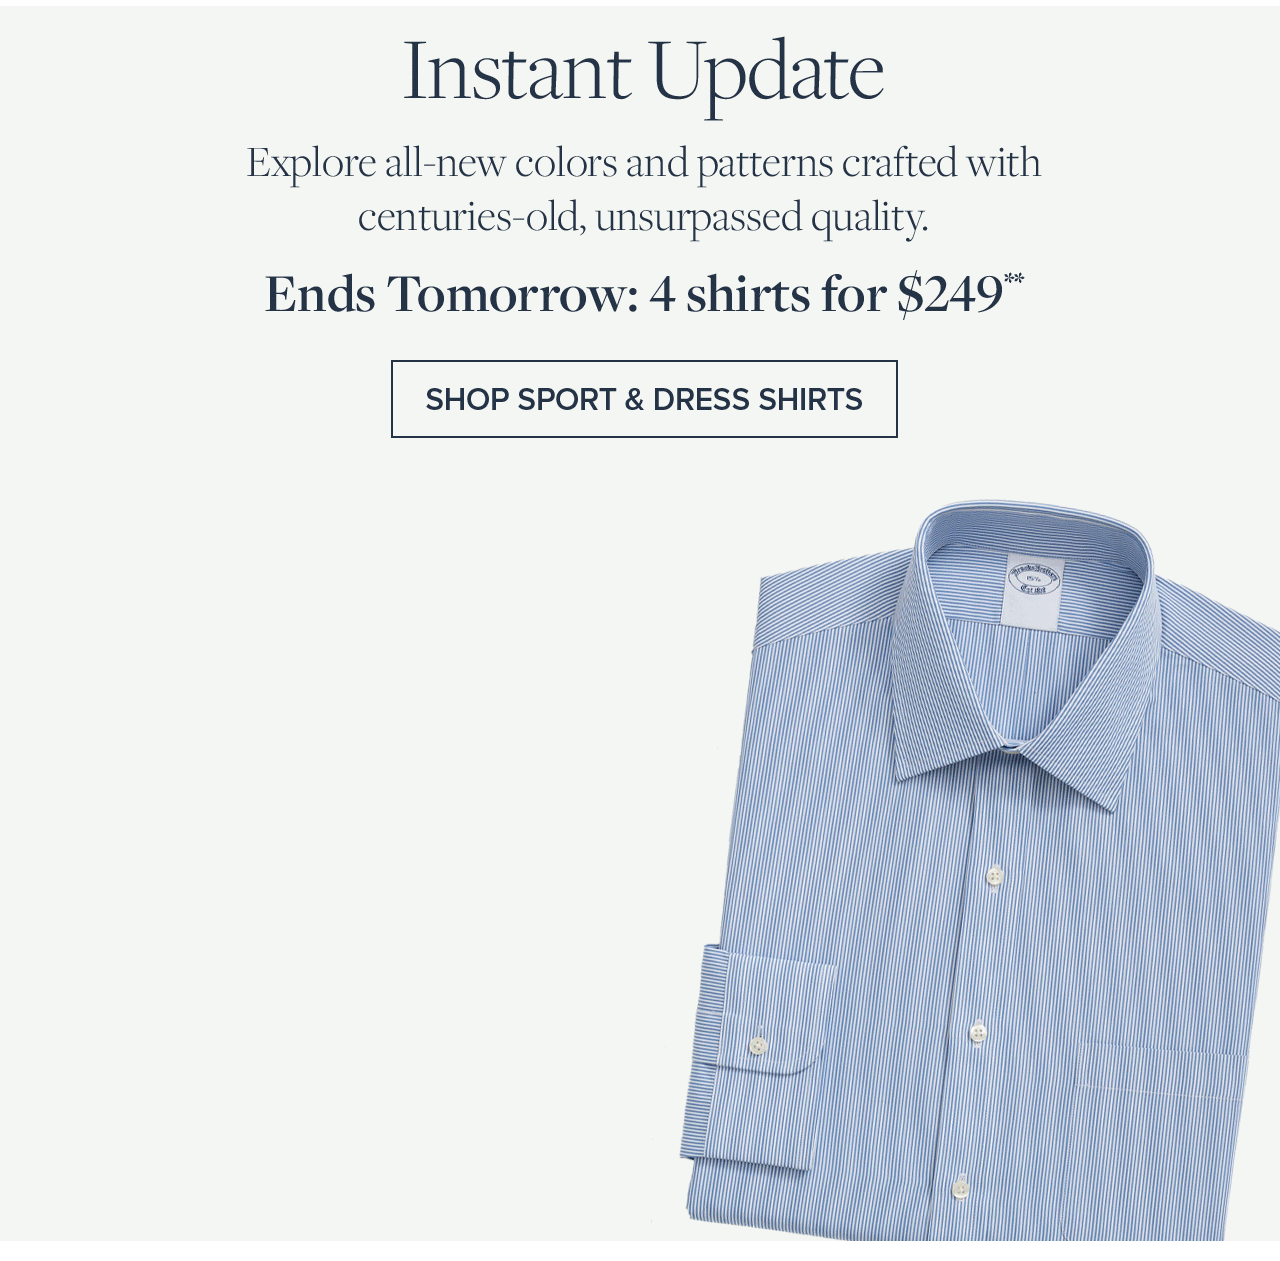 Instant Update Explore all-new colors and patterns crafted with centuries-old, unsurpassed quality. Ends Tomorrow: 4 shirts for \\$249. Shop Sport and Dress Shirts